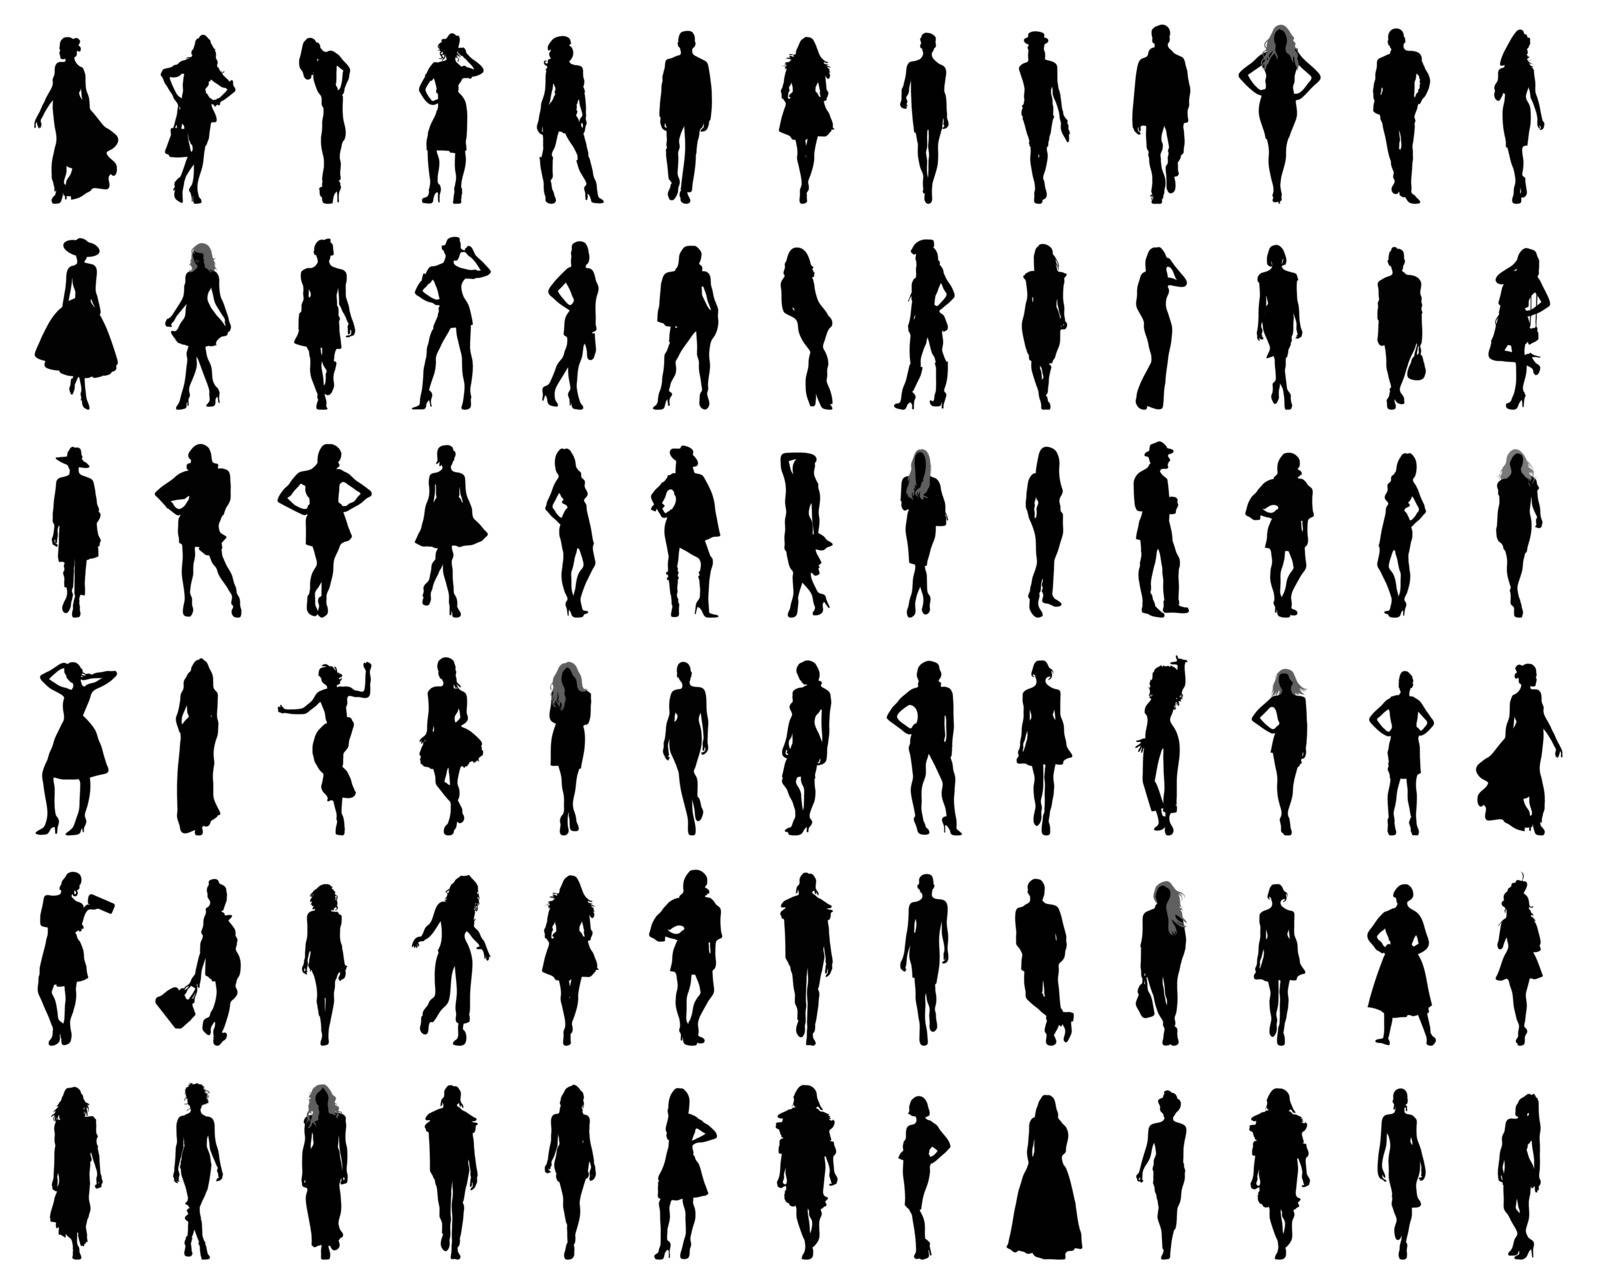 Black silhouettes of fashion, vector